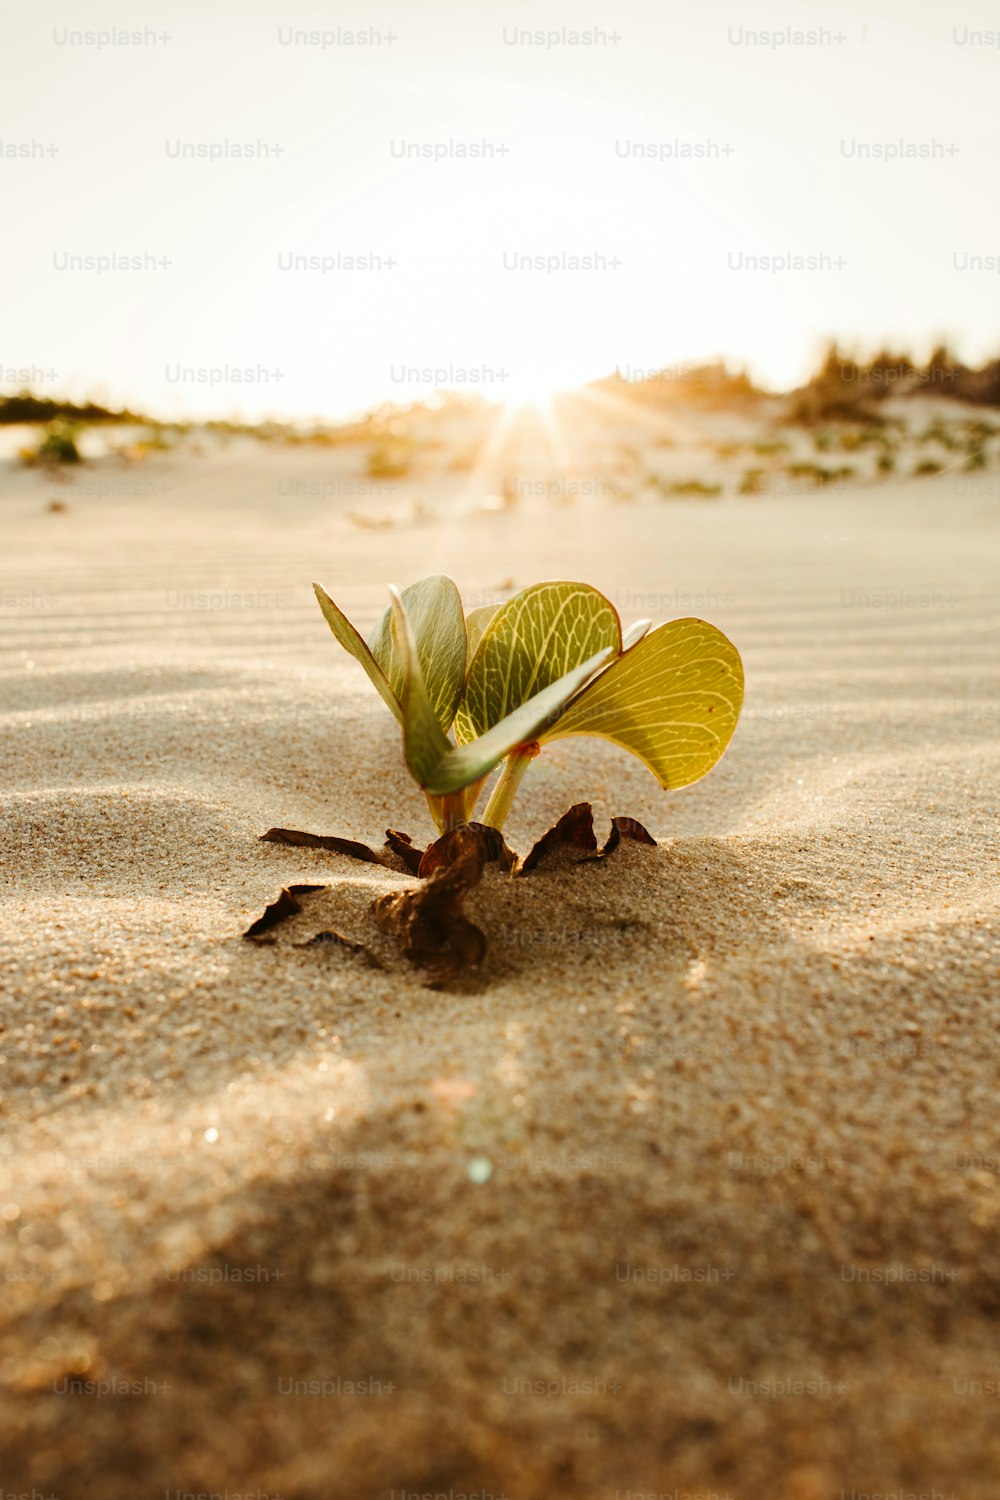 a small plant sprouts out of the sand